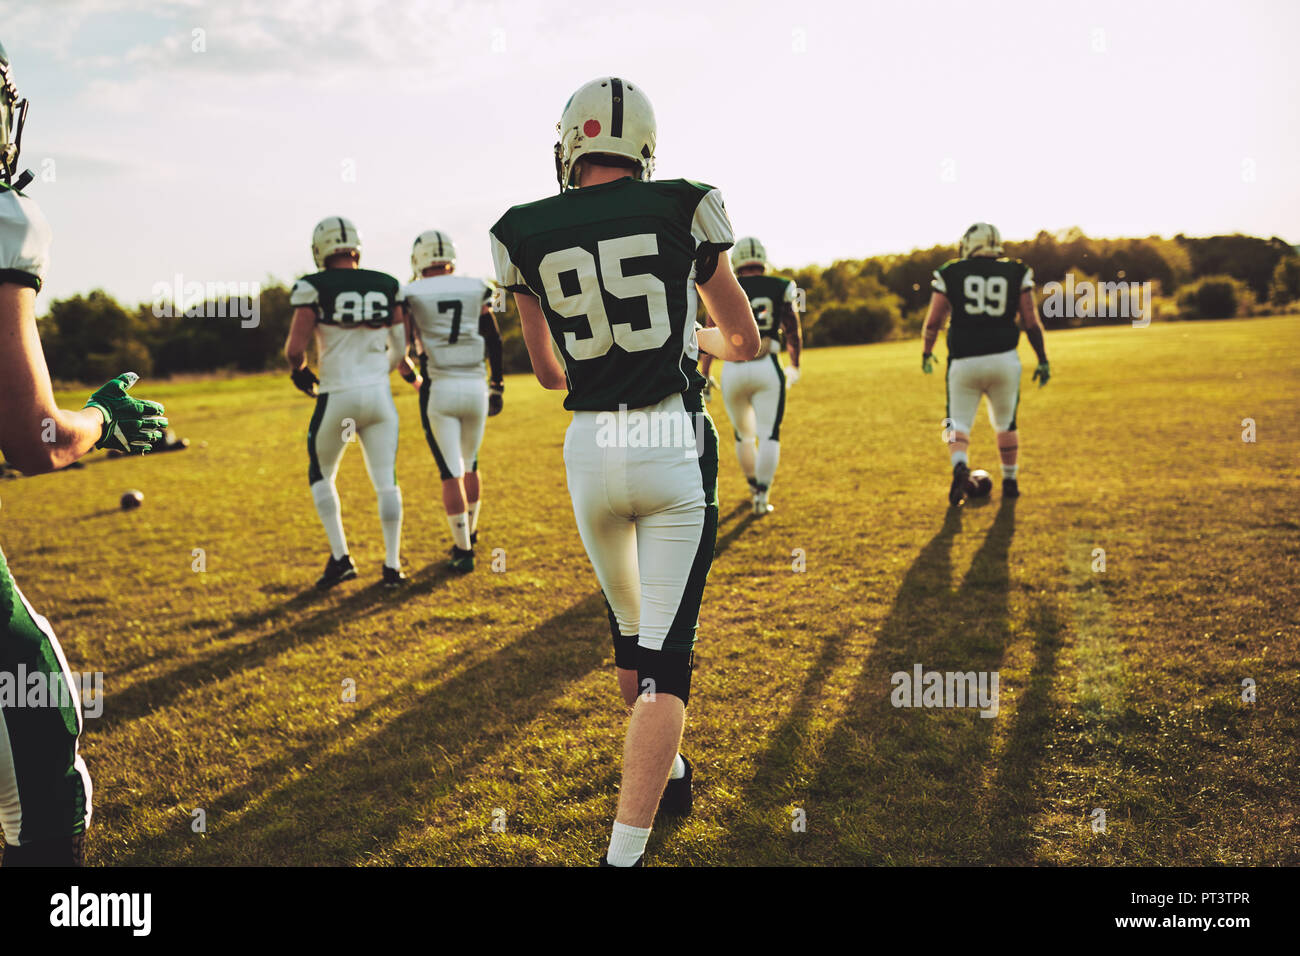 Rearview of a team of young American football players walking onto a sports field together for practice on a sunny afternoon Stock Photo